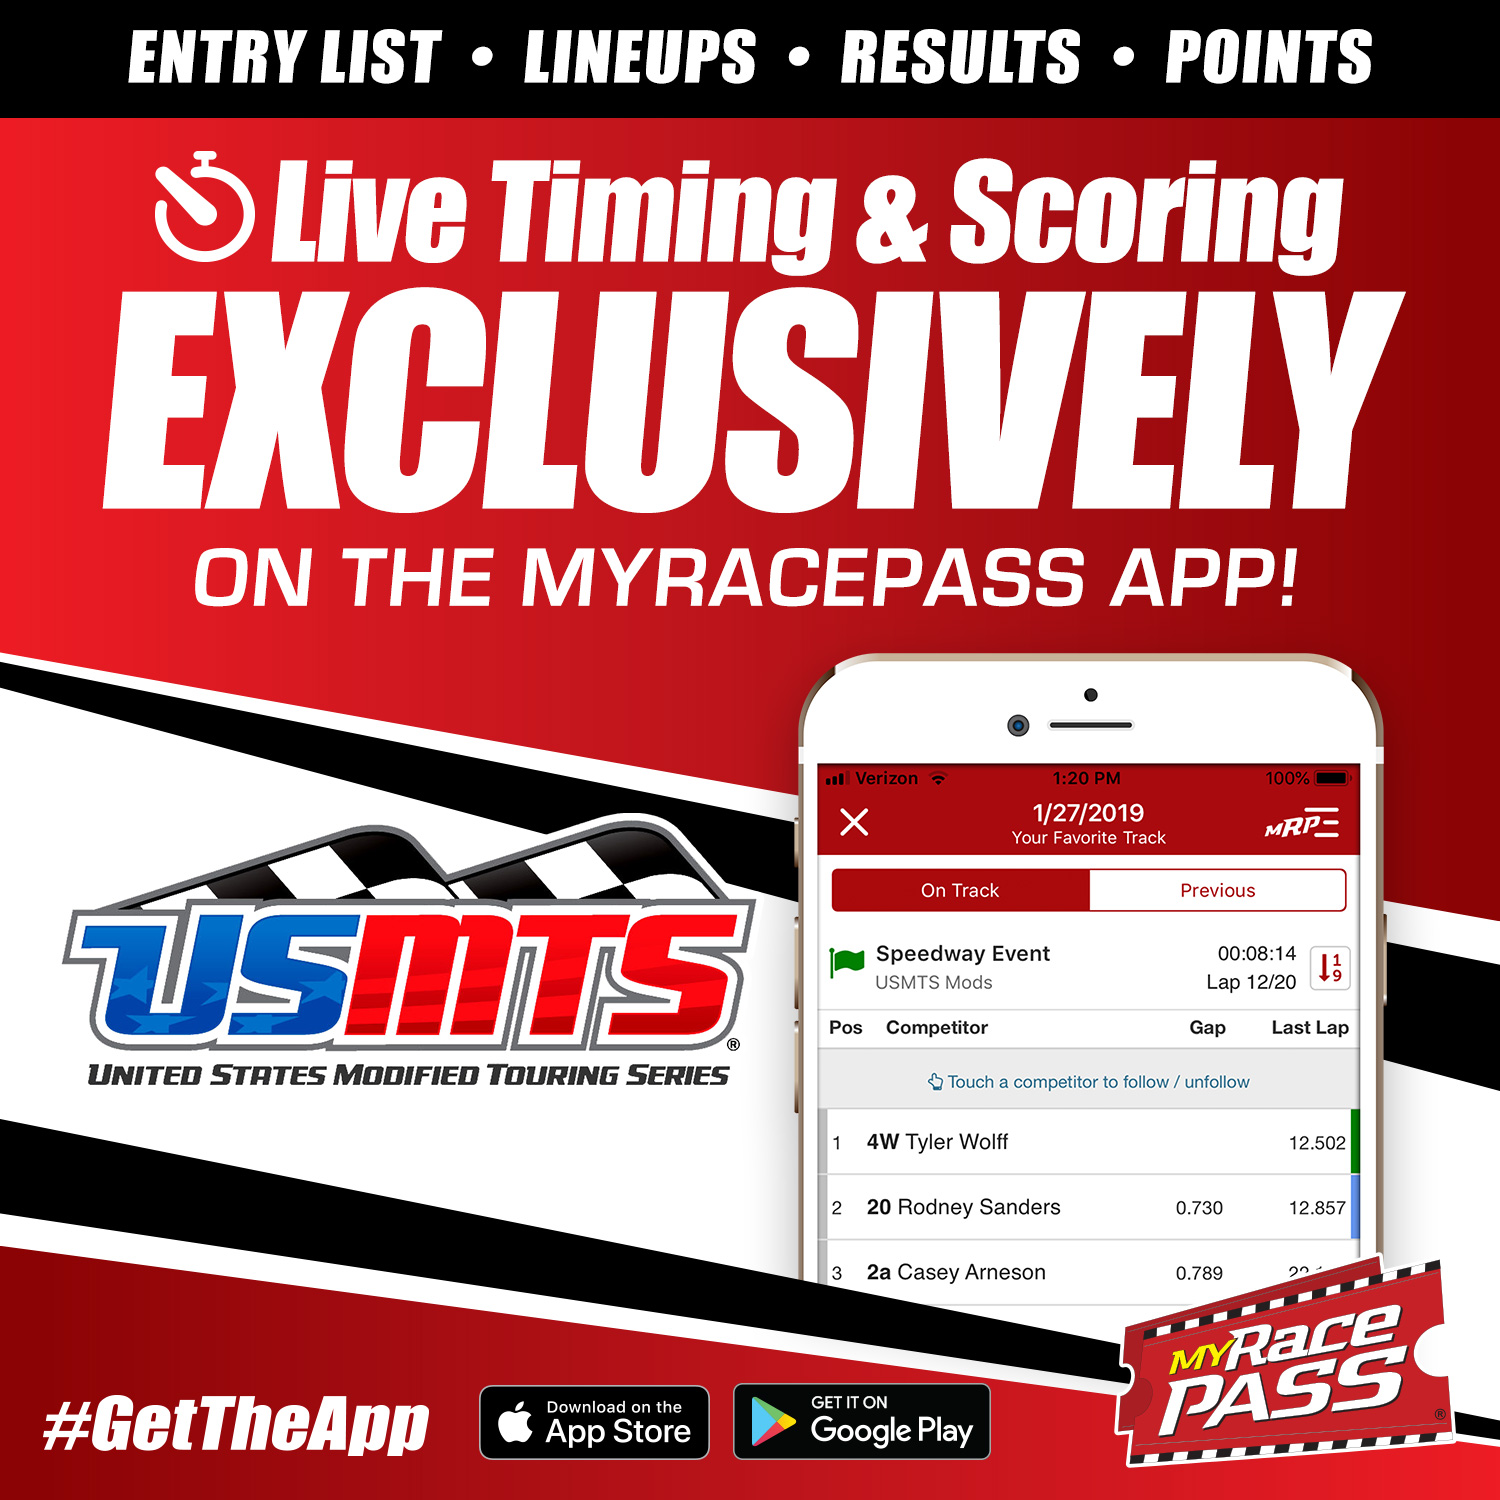 USMTS lineups, live timing exclusively on MyRacePass app